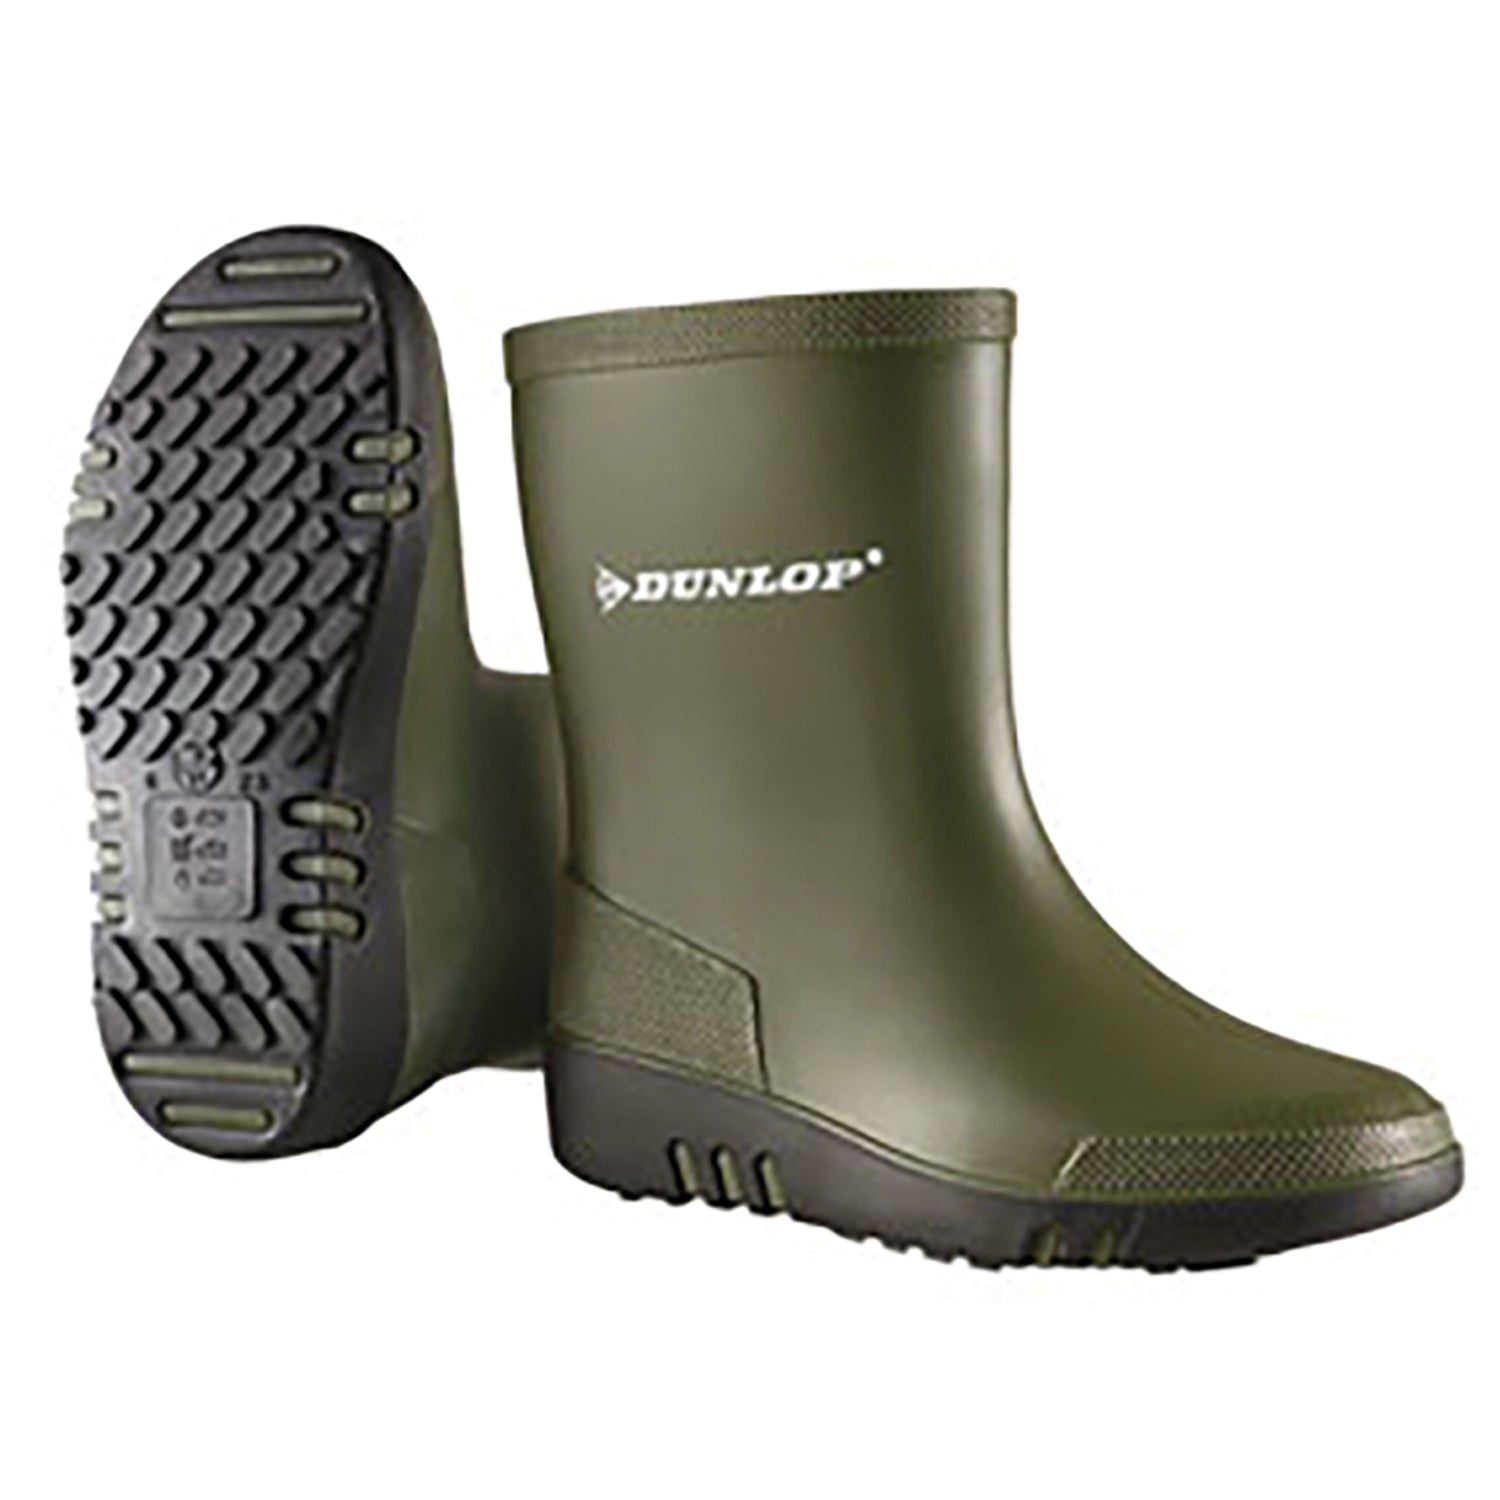 Dunlop Mini Child Boots - Just Horse Riders